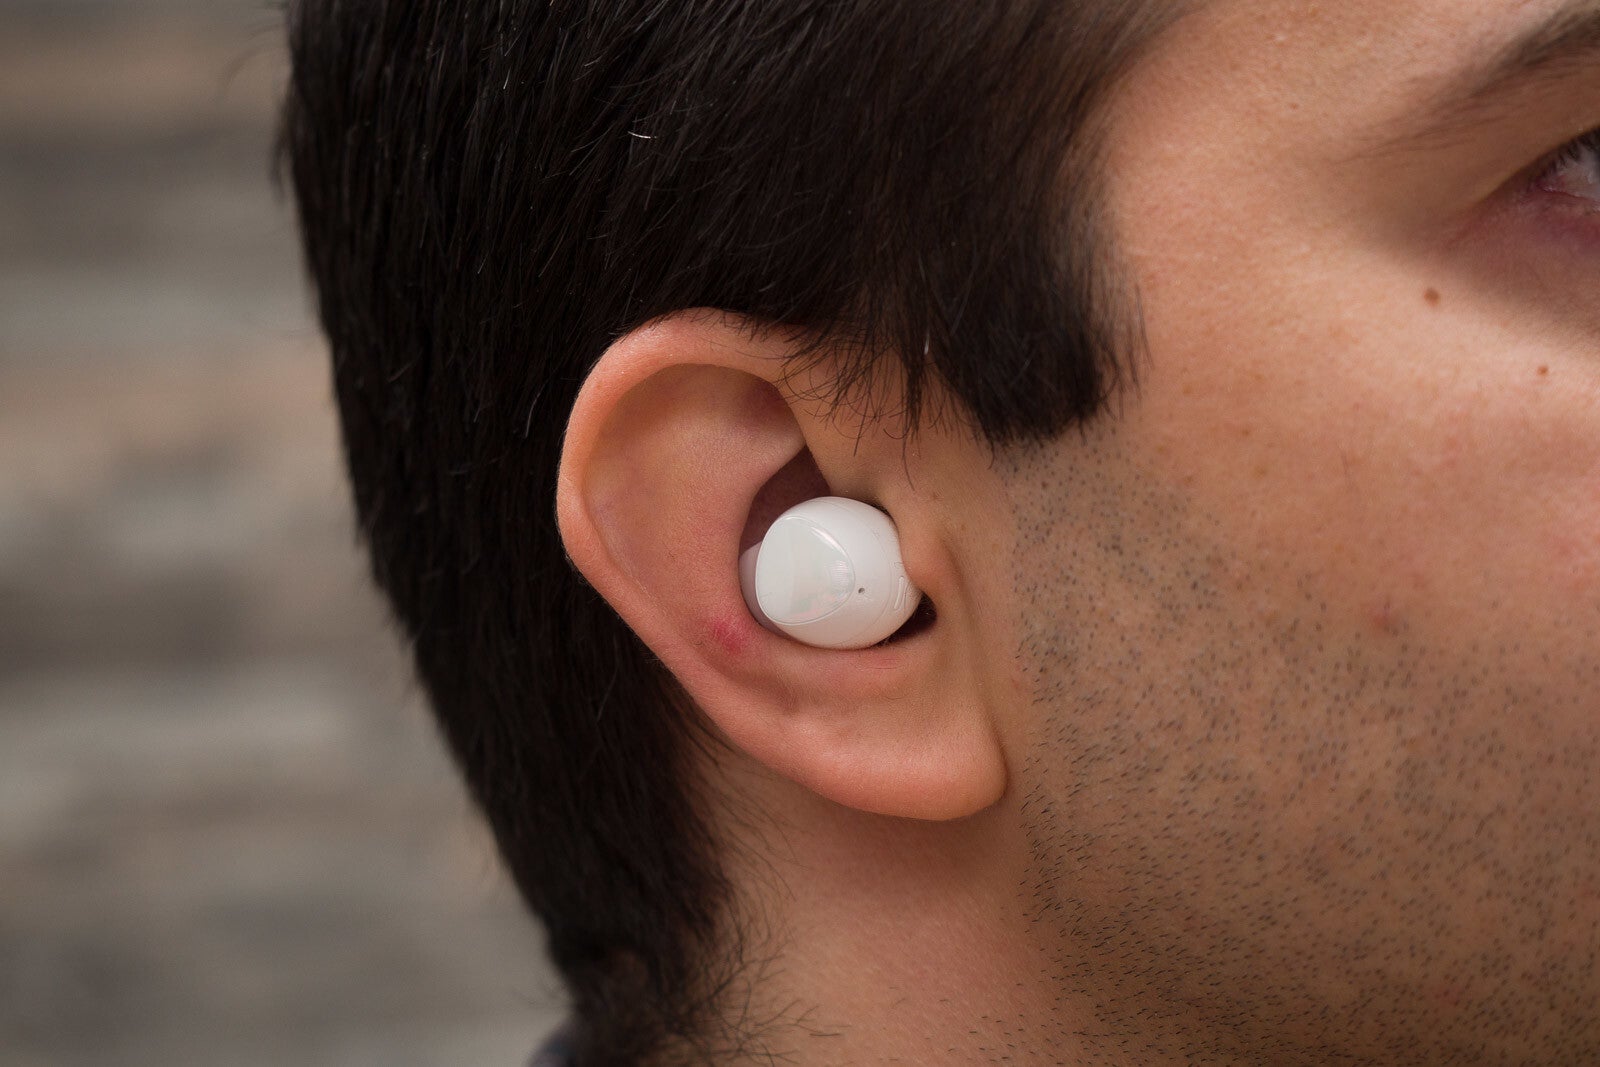 The discontinued Galaxy Buds Plus - Samsung Galaxy Buds Plus are now a thing of the past